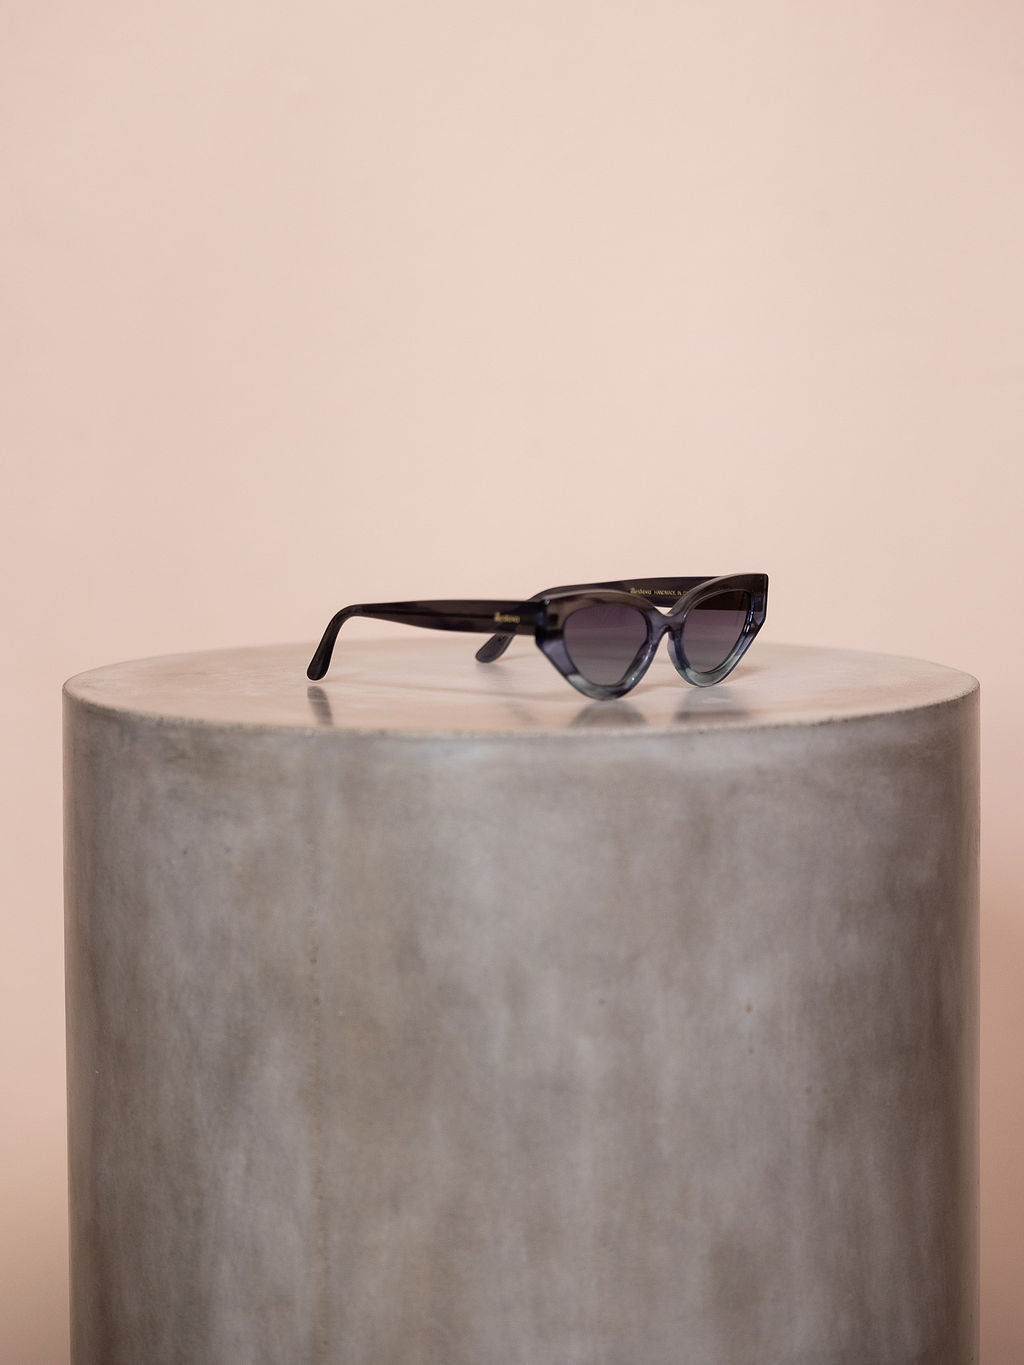 Gray sunglasses on podium against pink background